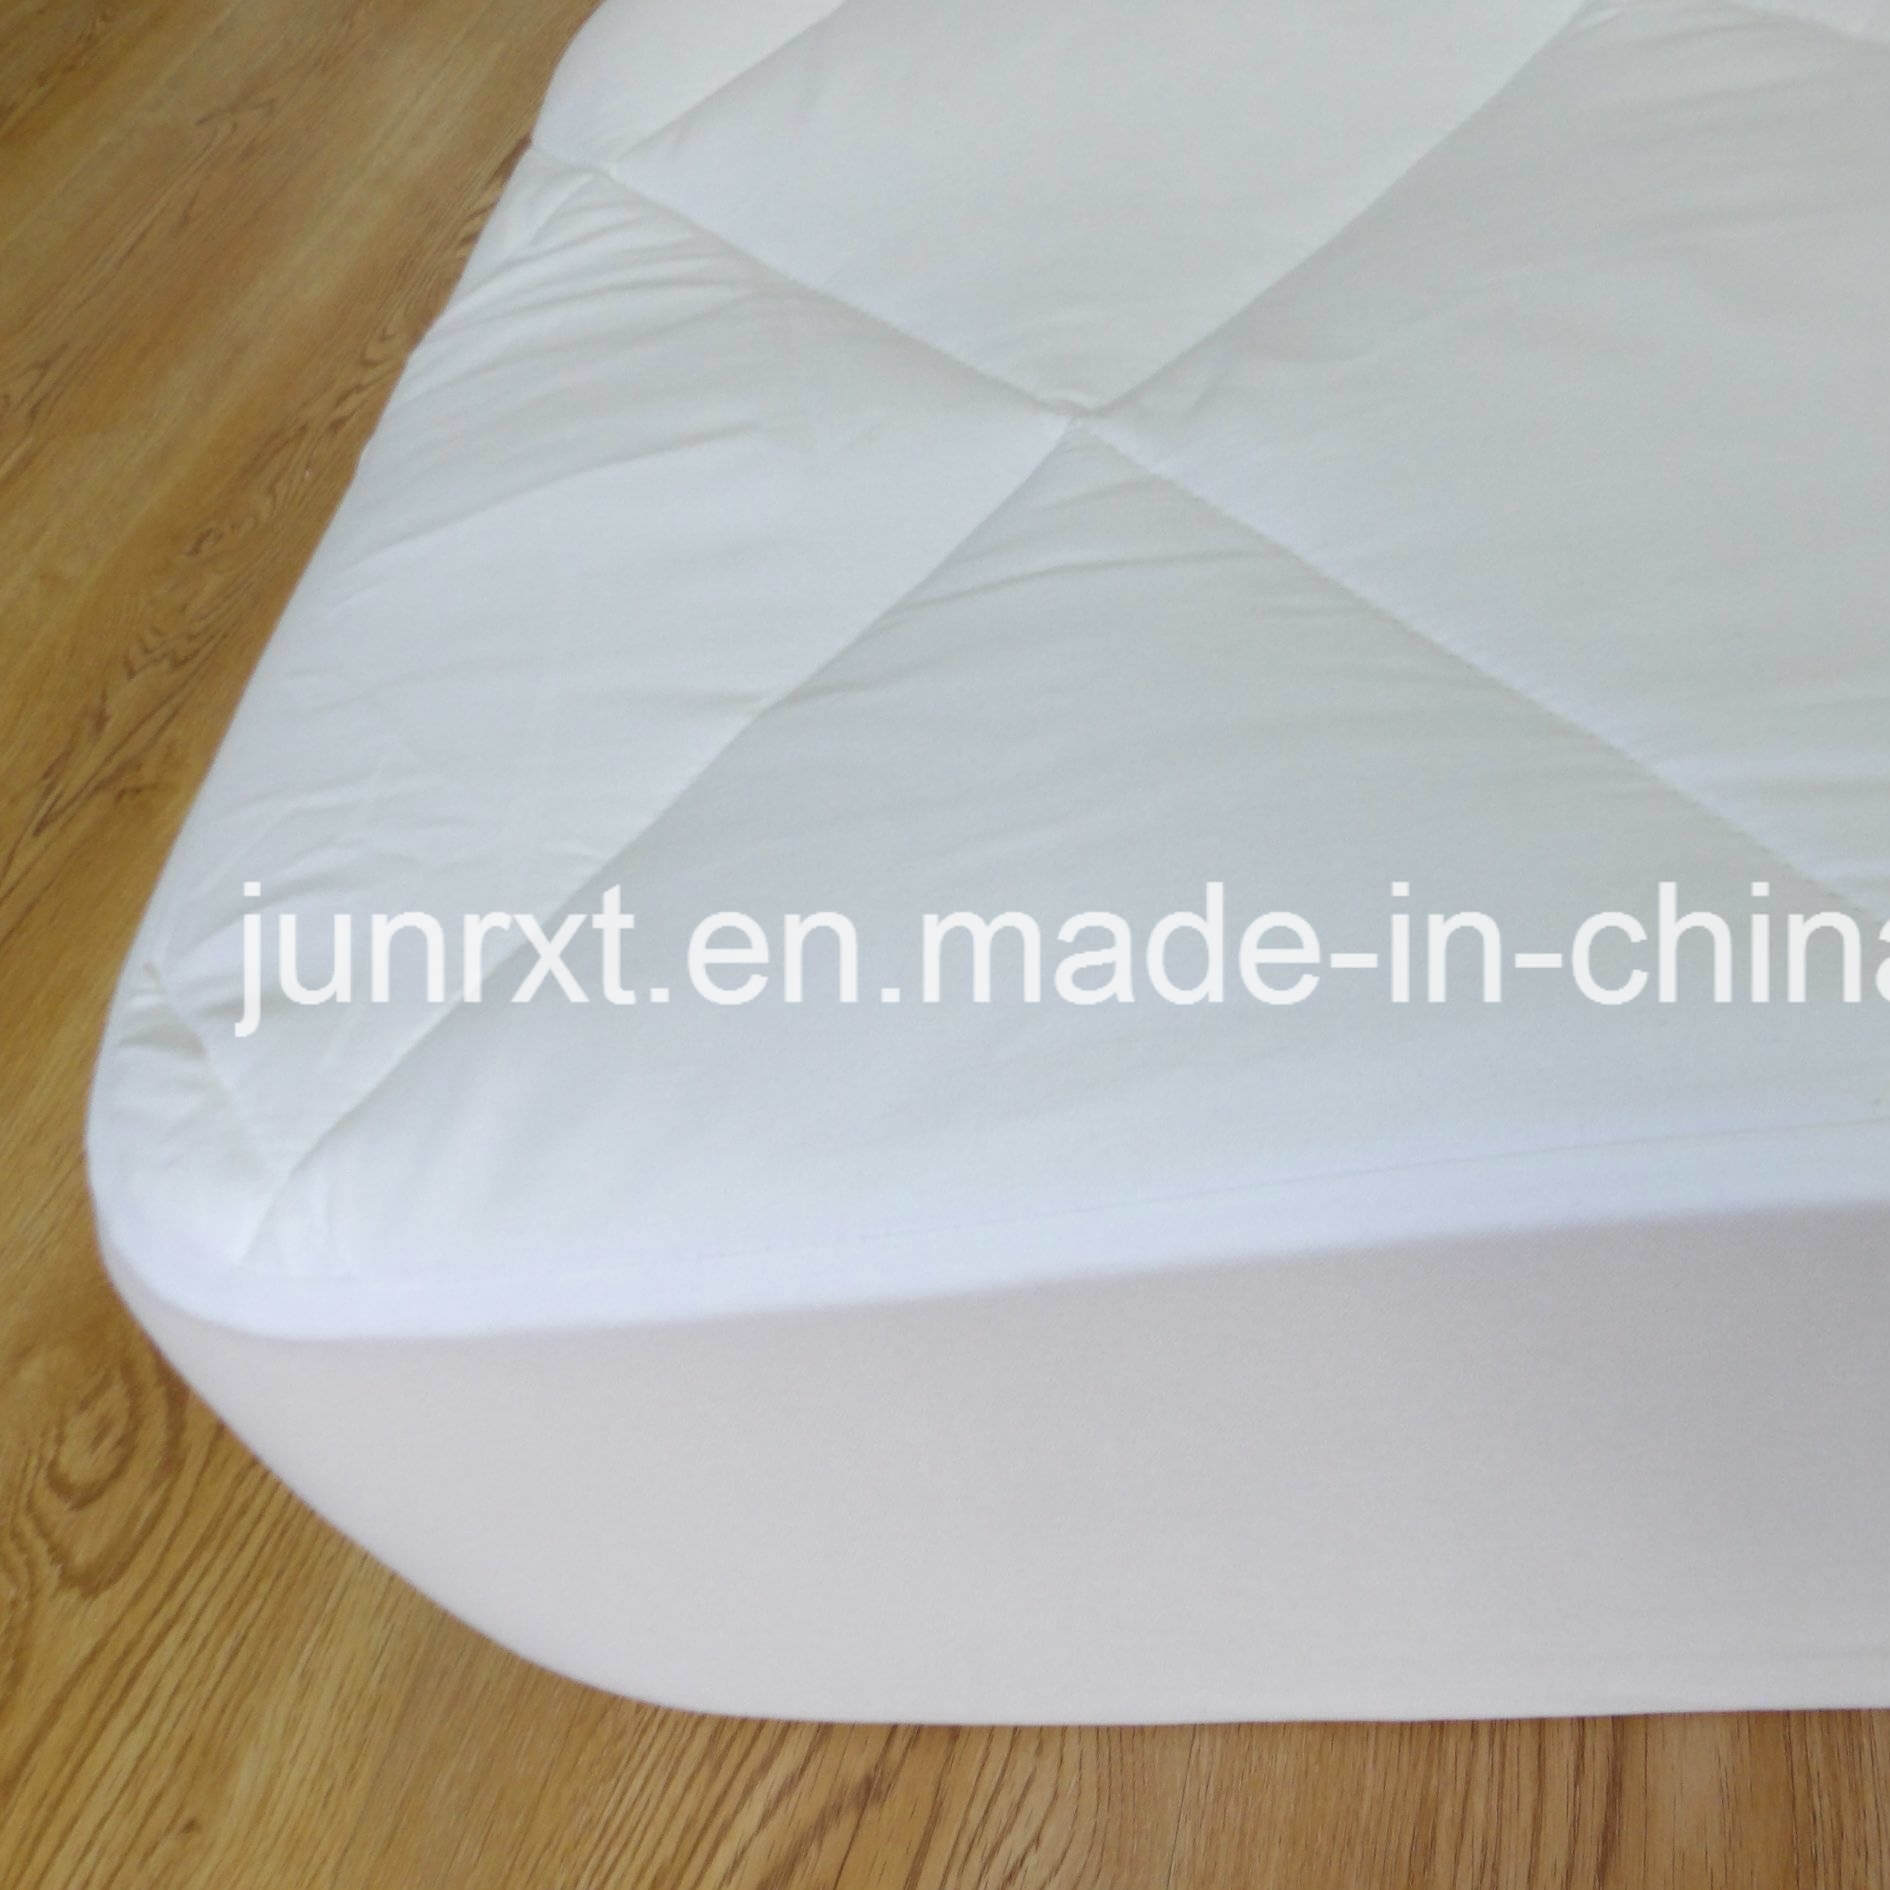 Mattress Protector Hotel Mattress Topper Fitted Cover for Bed Bed Sheet